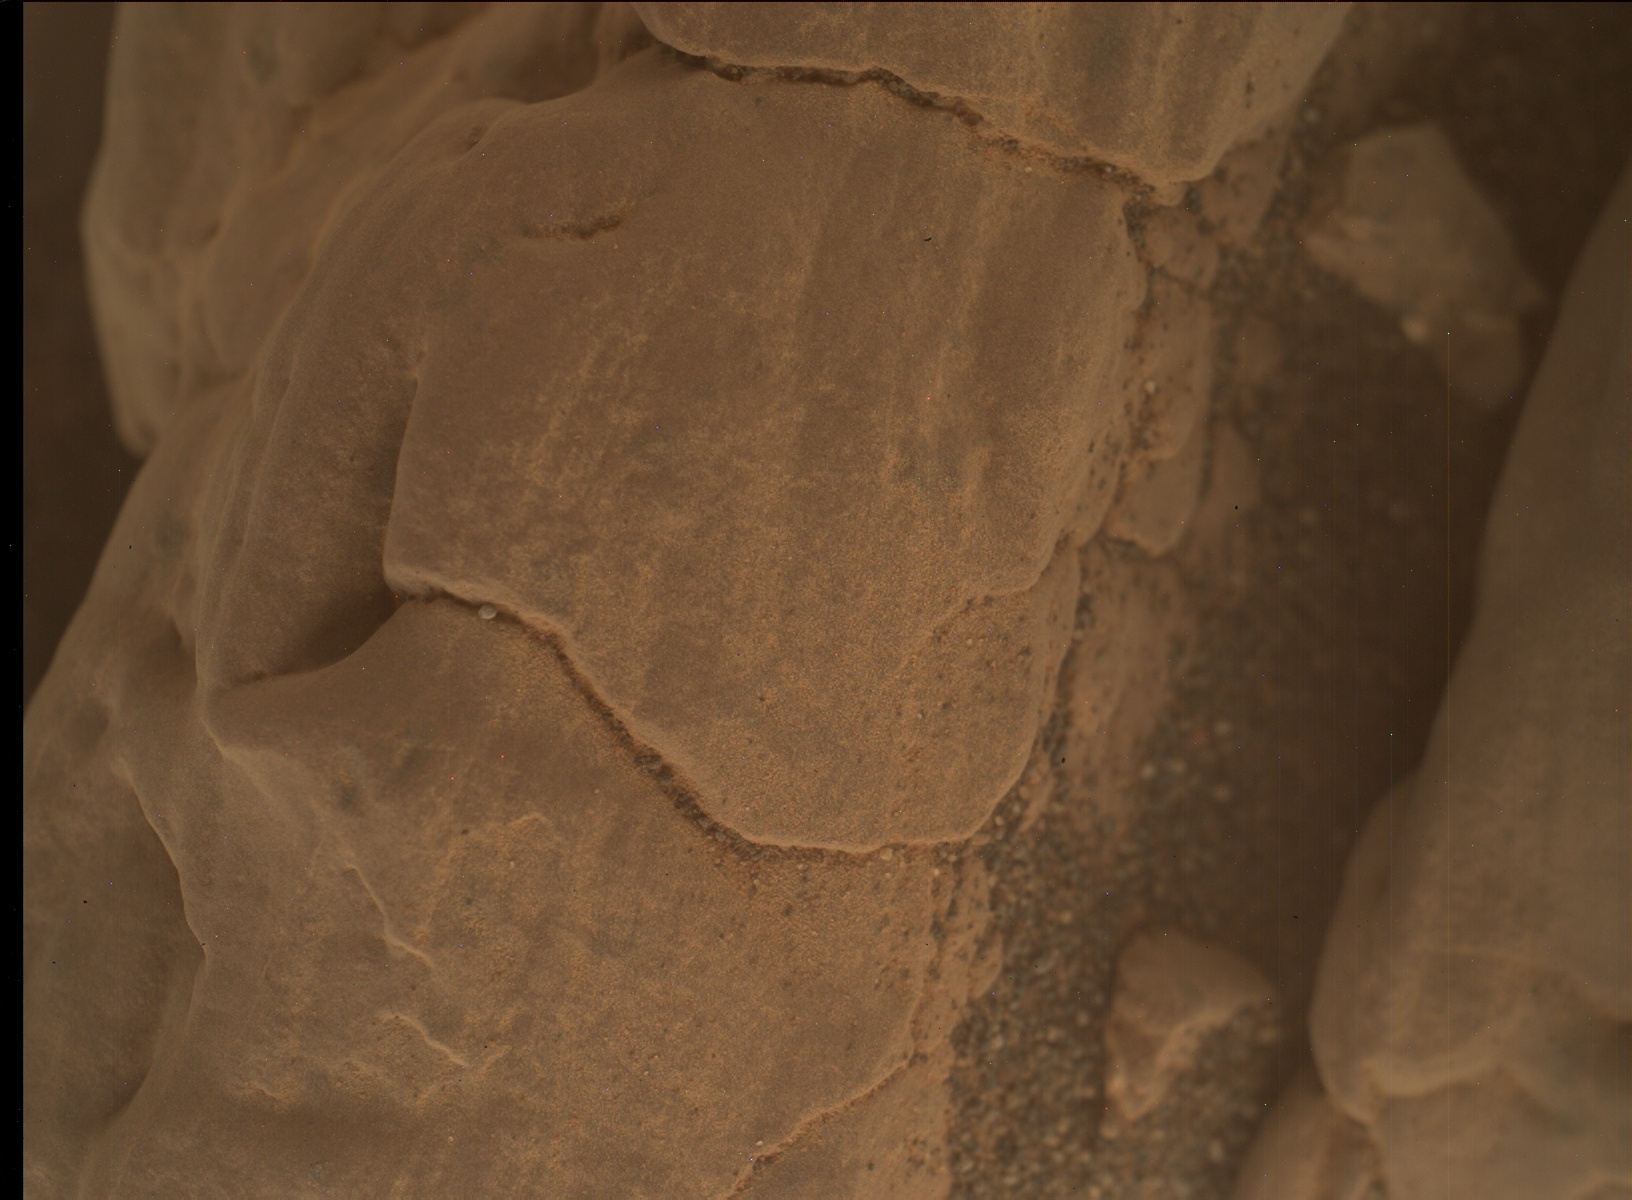 Nasa's Mars rover Curiosity acquired this image using its Mars Hand Lens Imager (MAHLI) on Sol 2942